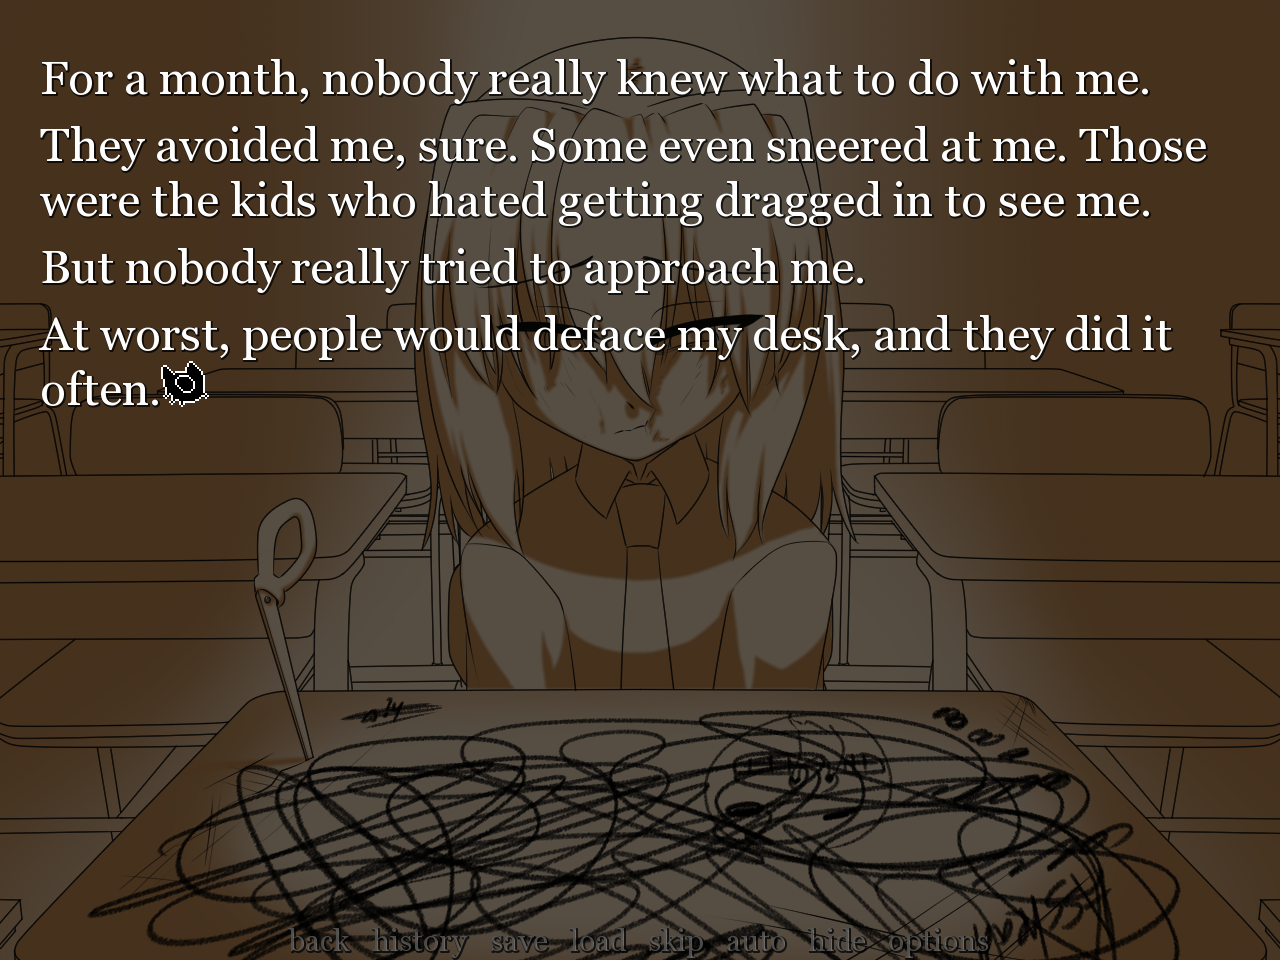 In-game screenshot of a younger Mercy sitting at a defaced desk with a bruised and injured face. In-game text reads: For a month, nobody really knew what to do with me. They avoided me, sure. Some even sneered at me. Those were the kids who hated getting dragged in to see me. But nobody really tried to approach me. At worst, people would deface my desk, and they did it often.